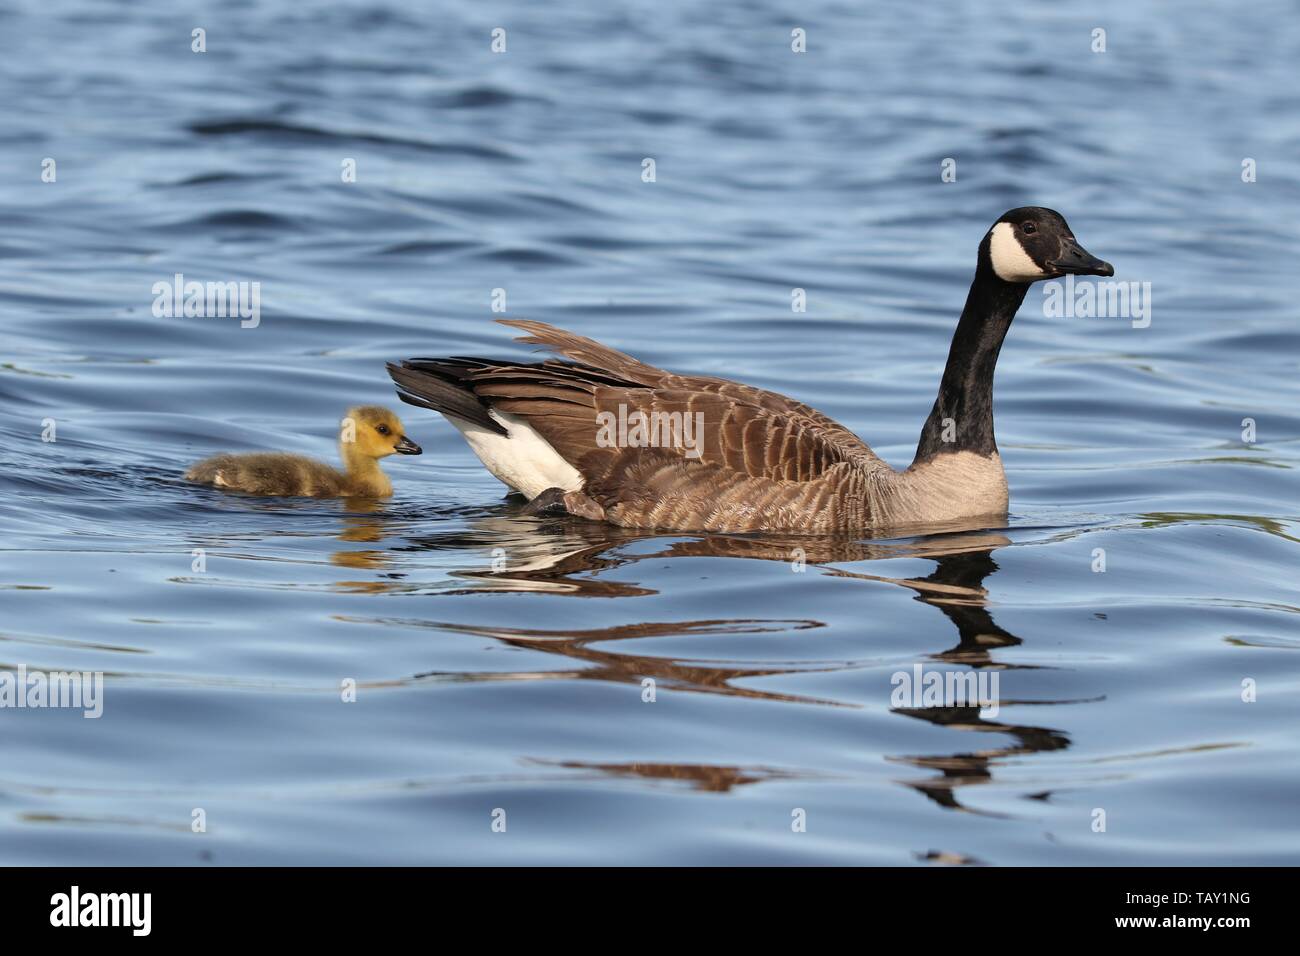 A canada goose swimming with a gosling on a pond in Springtime Stock Photo